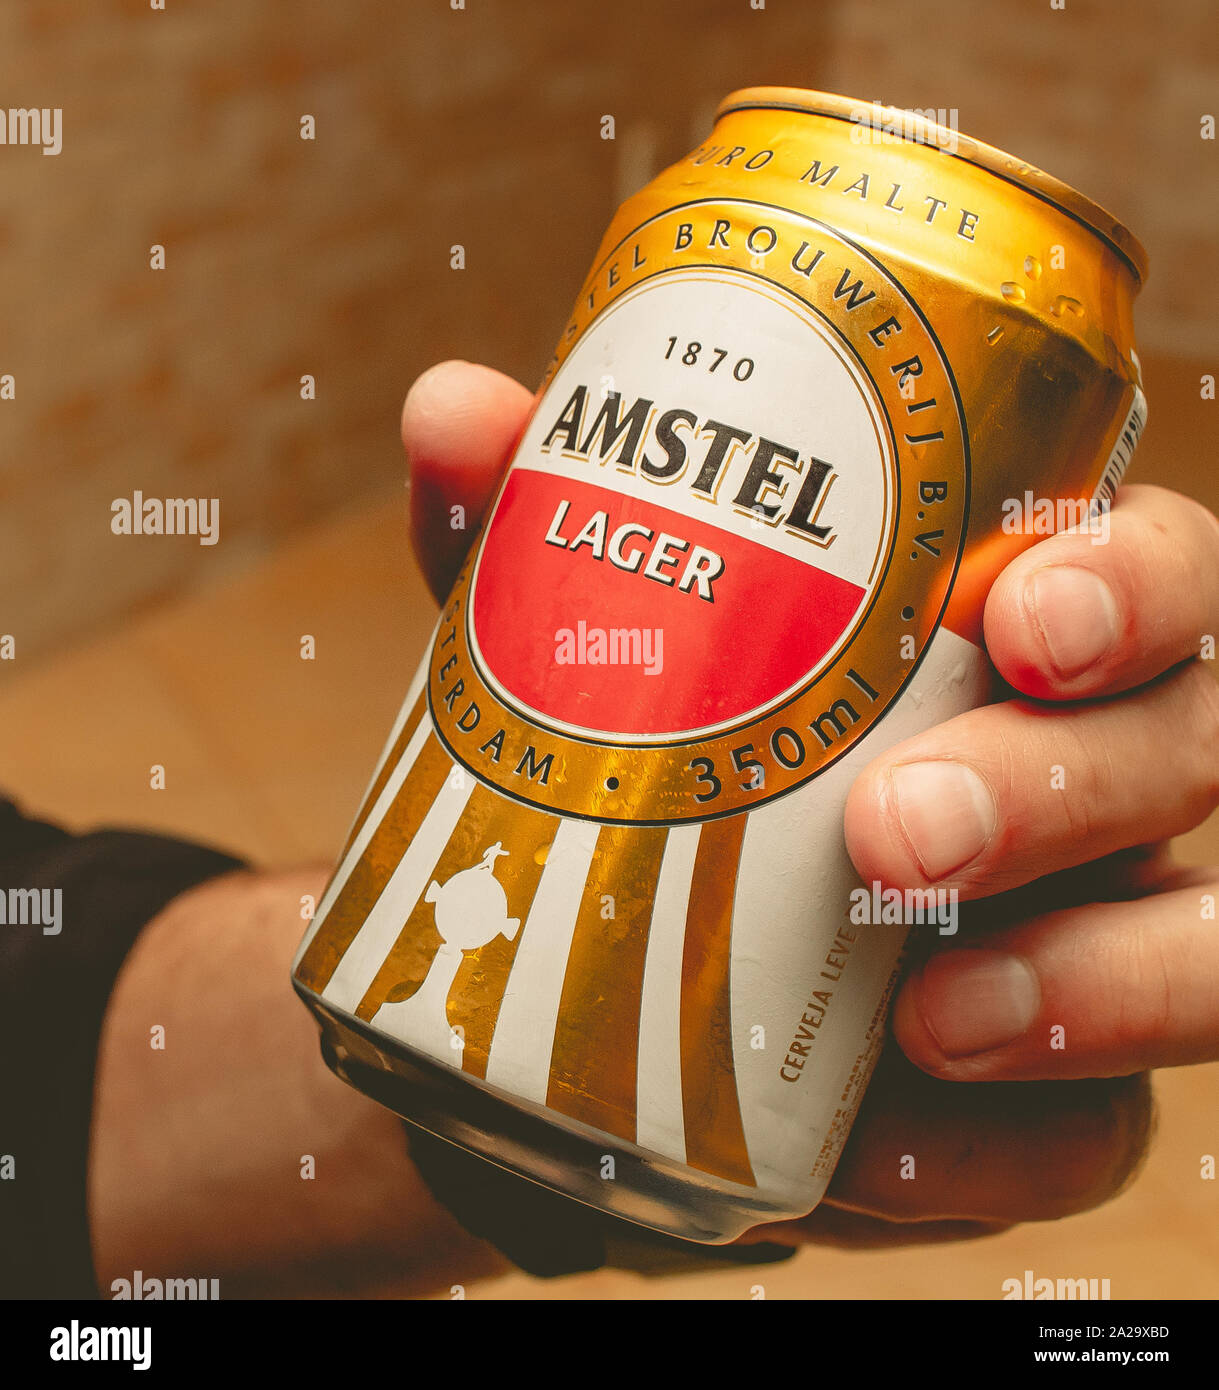 Man holding a canned beer by AMSTEL. Stock Photo